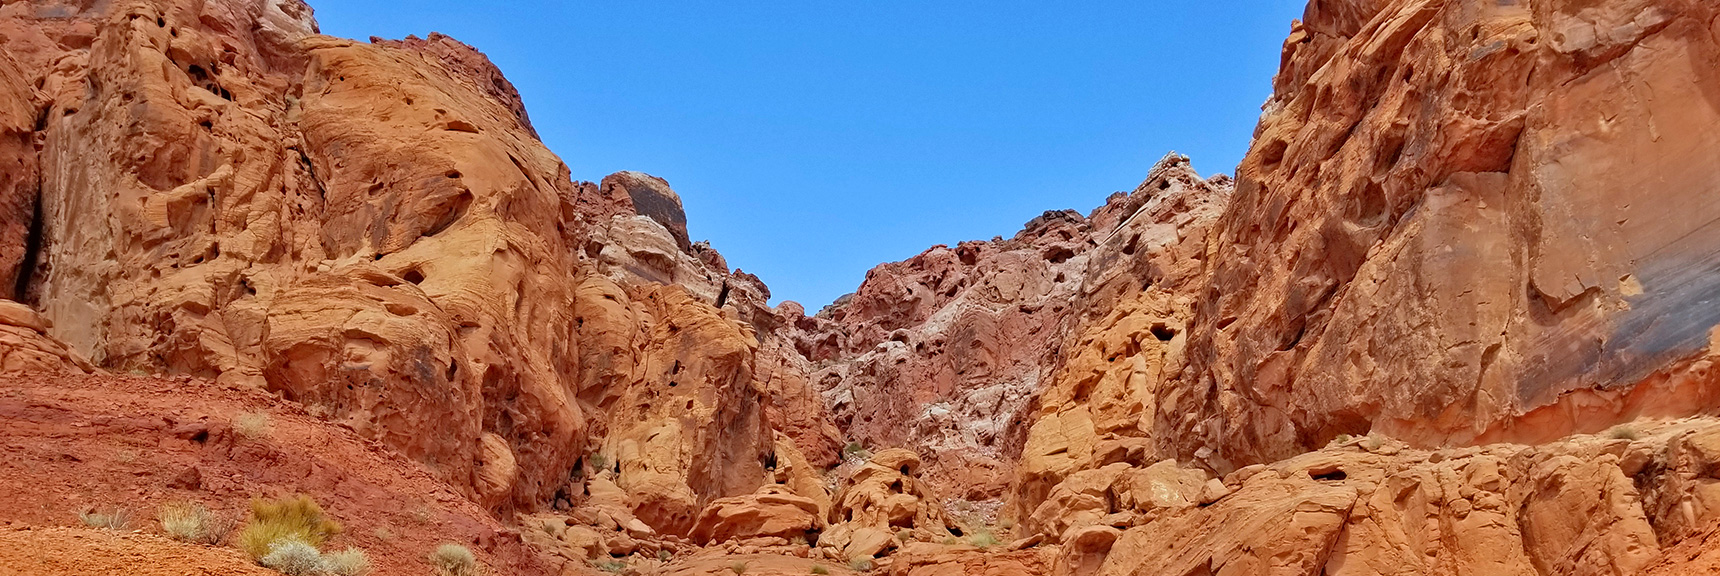 Another Opening in the Northern Cliff Area | Northern Bowl of Fire | Lake Mead National Recreation Area, Nevada